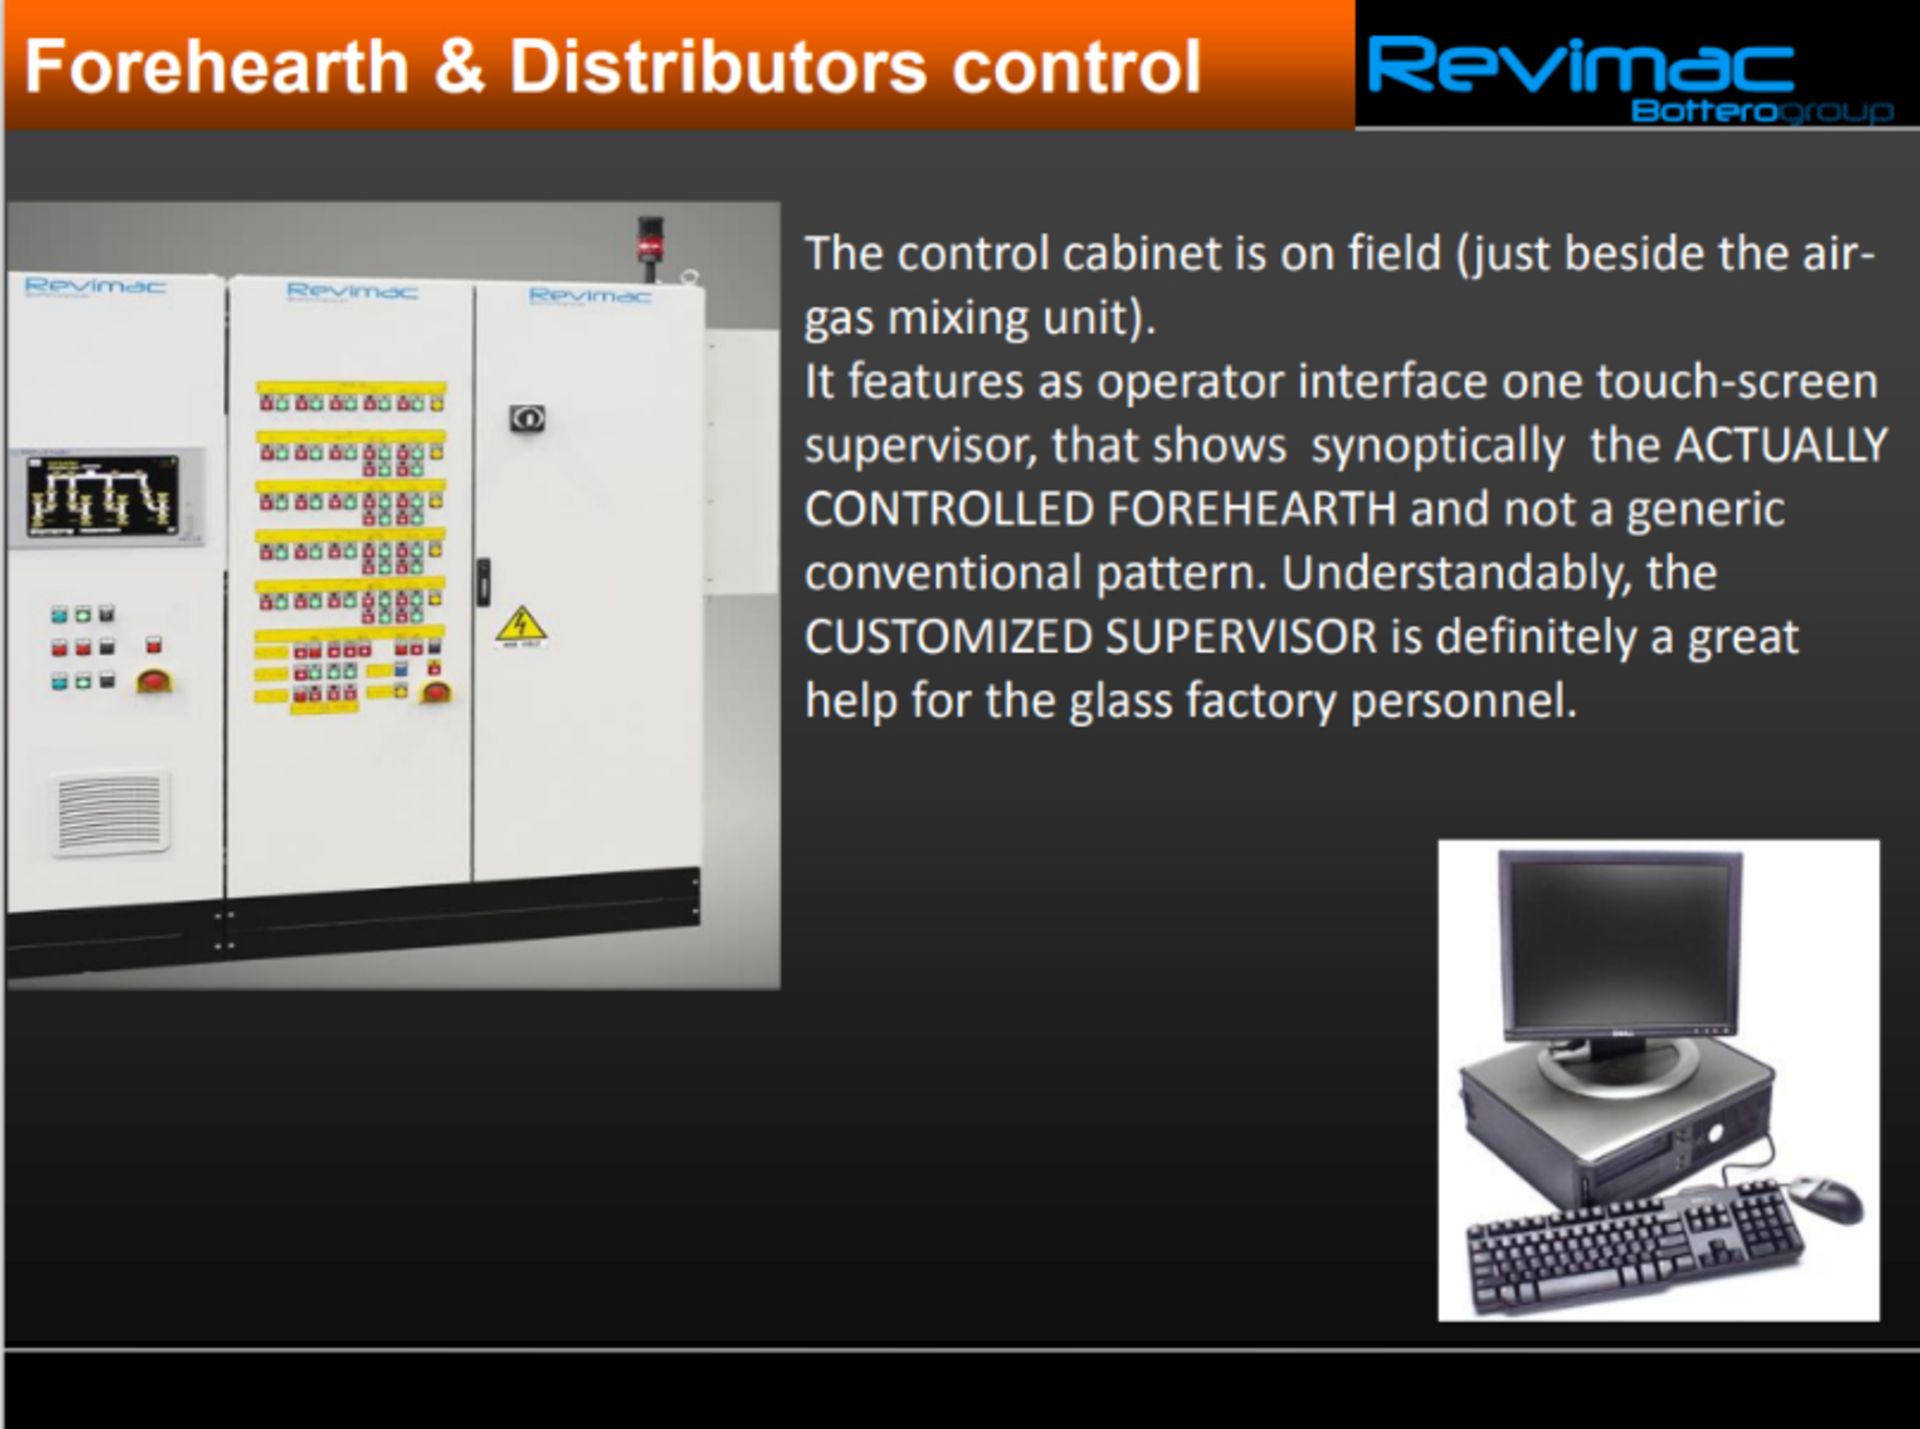 Revimac Forehearth Control System *Subject to Confirmation* - Image 6 of 18